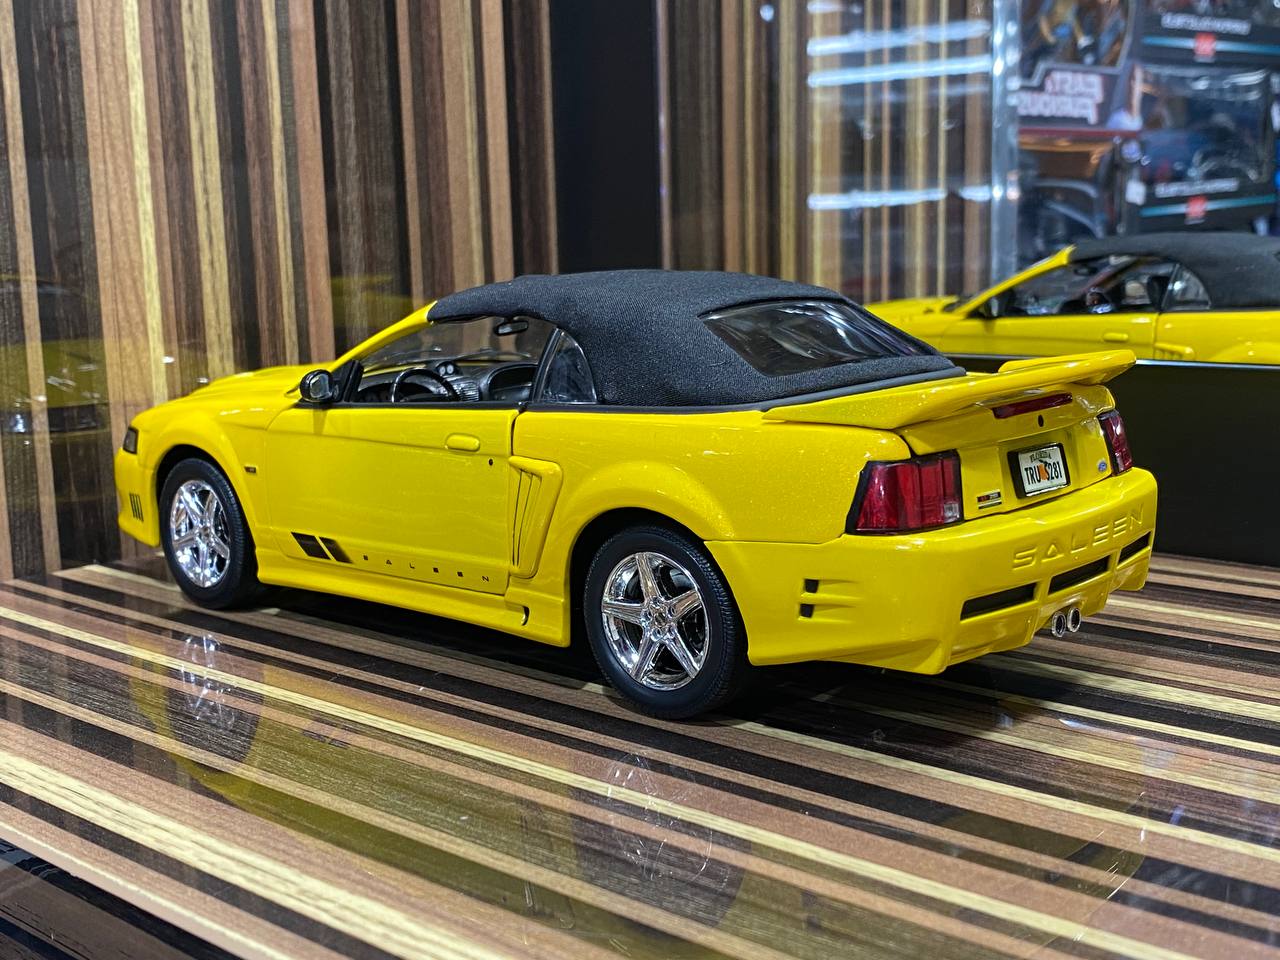 Ford Saleen Mustang S281 2003 Yellow Model Car by Joy Ride | 1/18 Diecast